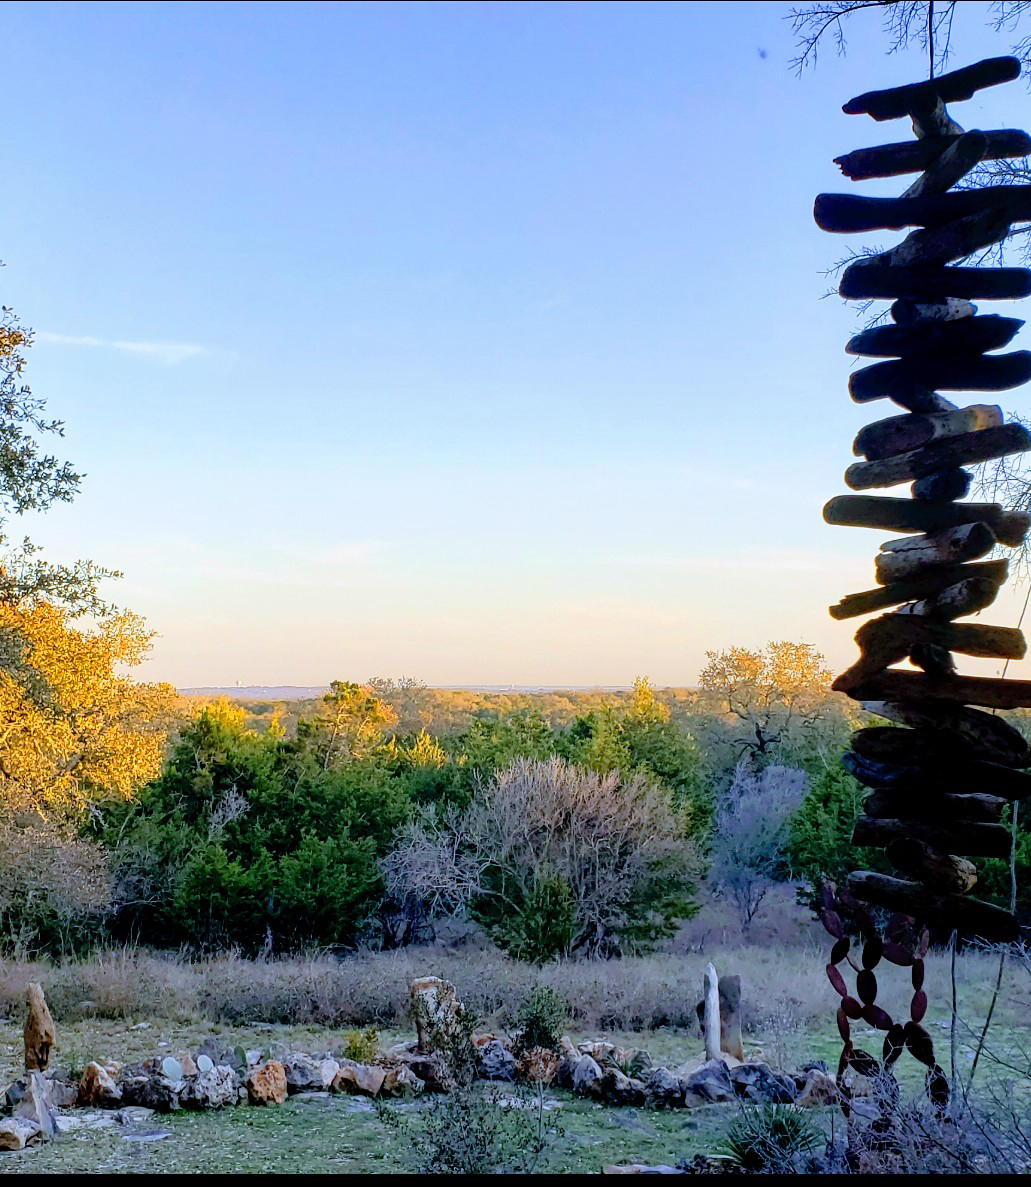 The view over the Hill Country from Craig Taylor's back porch.